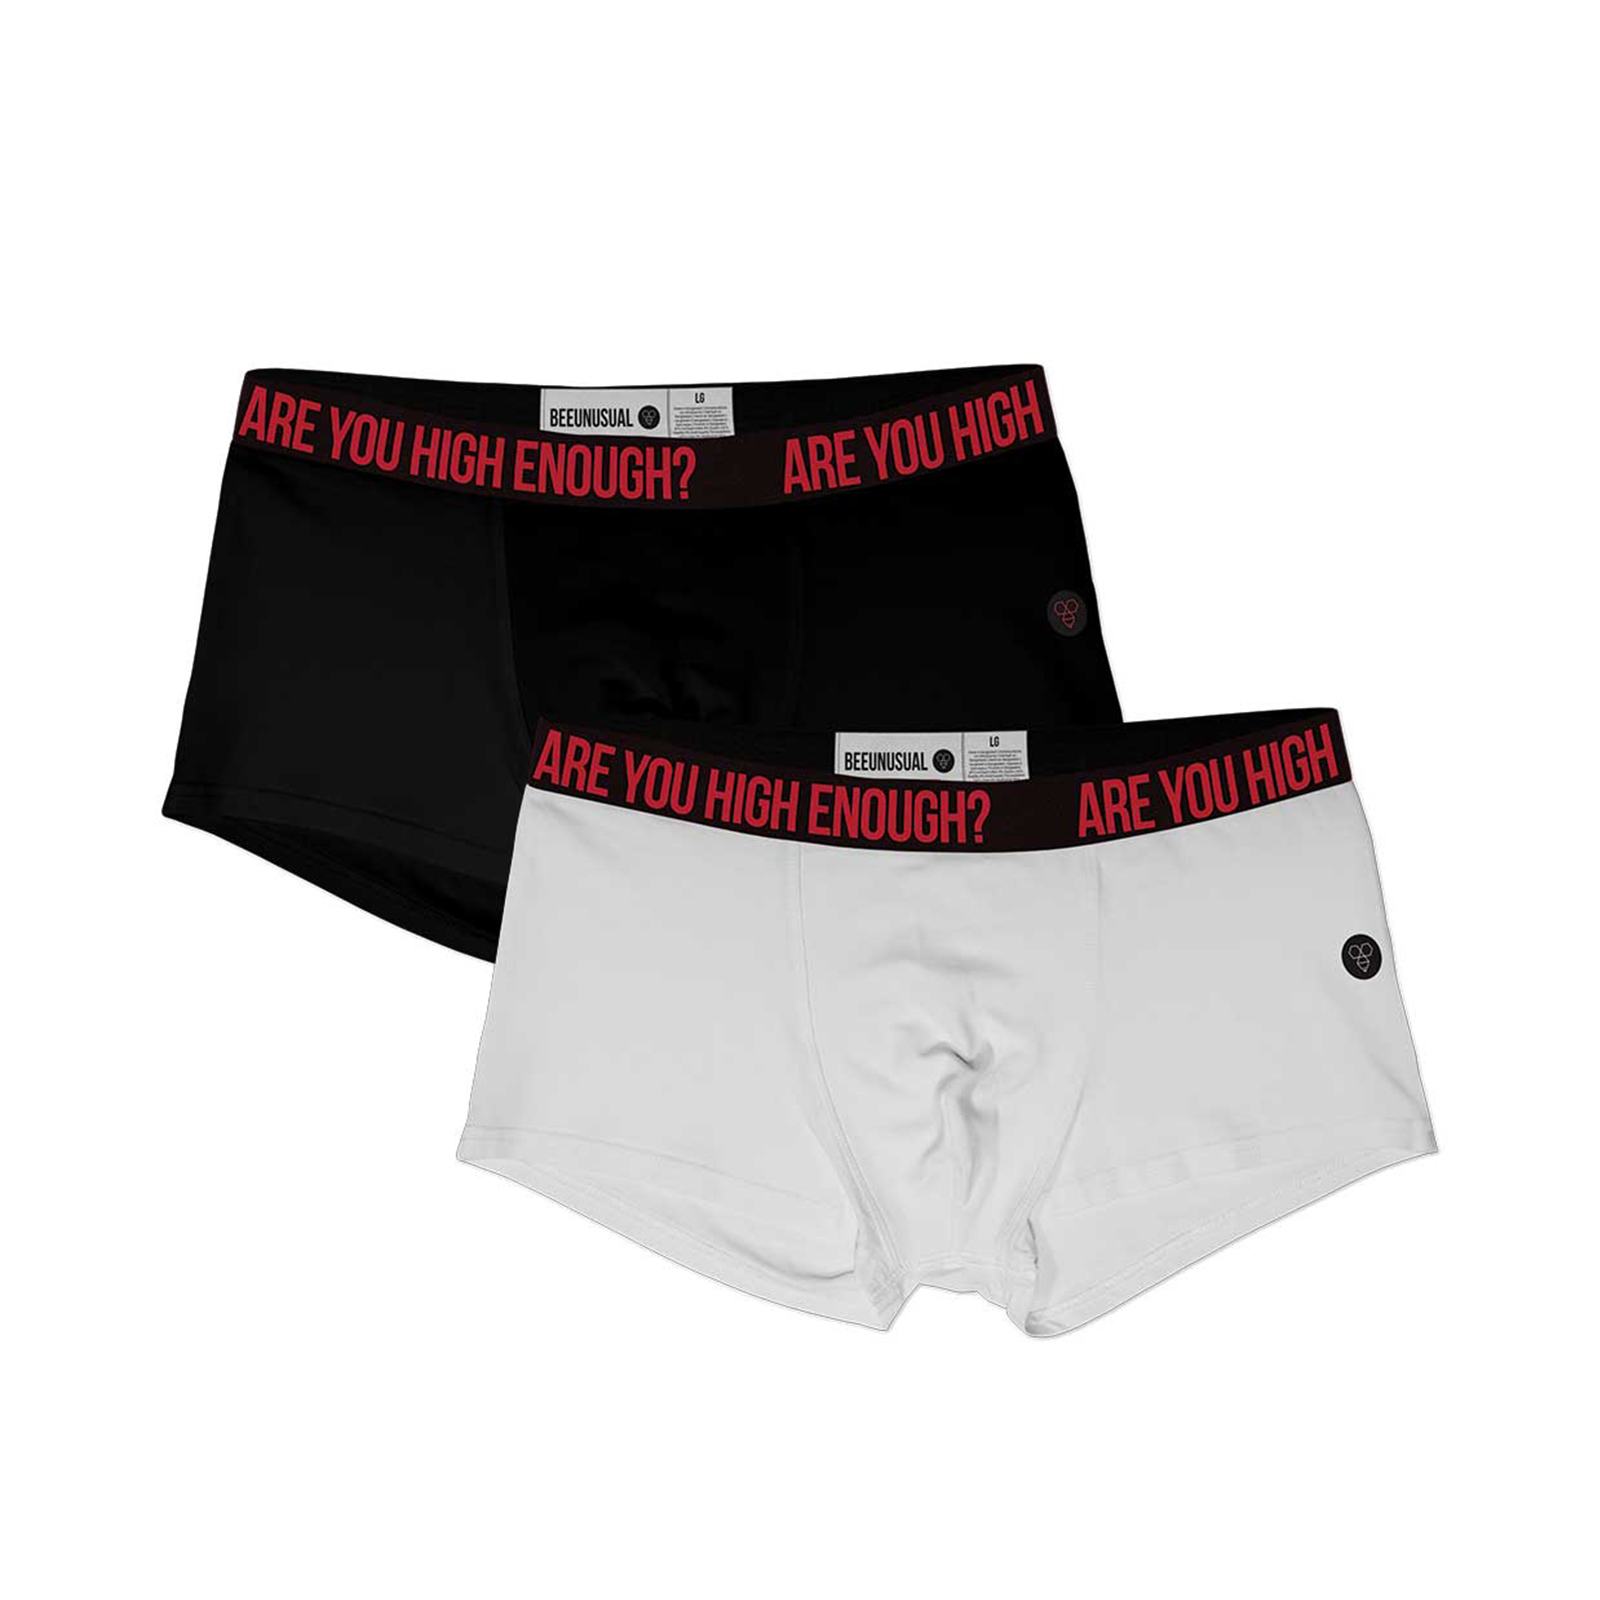 Bee Unusual - “ARE U HIGH ENOUGH?” BOXER TRUNK 2PK BLK&WHT - ASSORTED